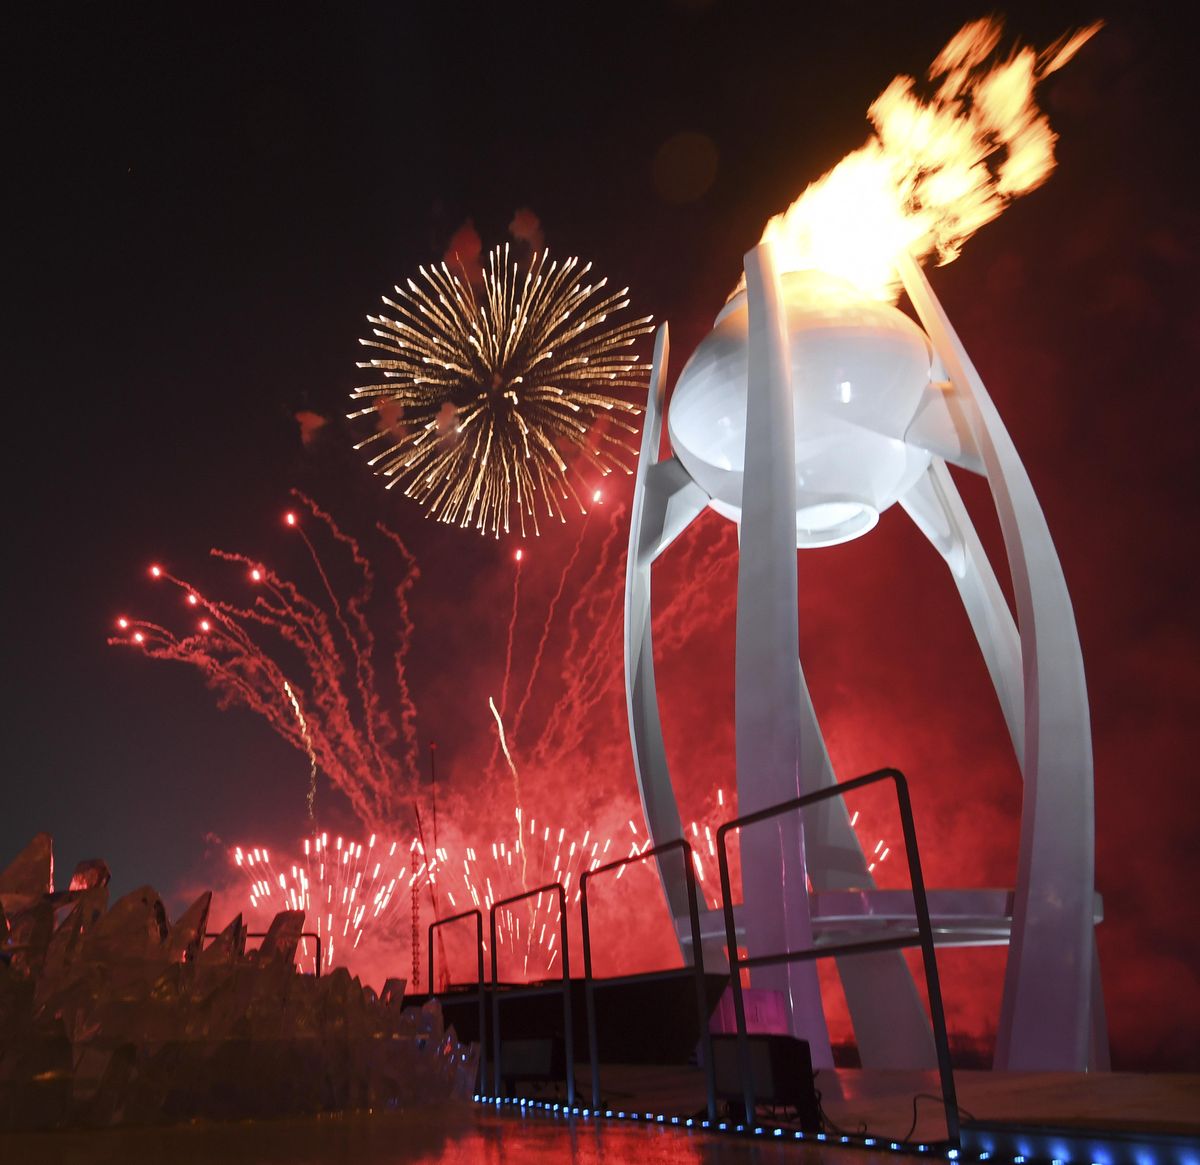 Fireworks explode behind the Olympic flame during the opening ceremony of the 2018 Winter Olympics in Pyeongchang, South Korea, Friday, Feb. 9, 2018. (Franck Fife/Pool Photo via AP) ORG XMIT: OLYJL154 (Franck Fife / AP)